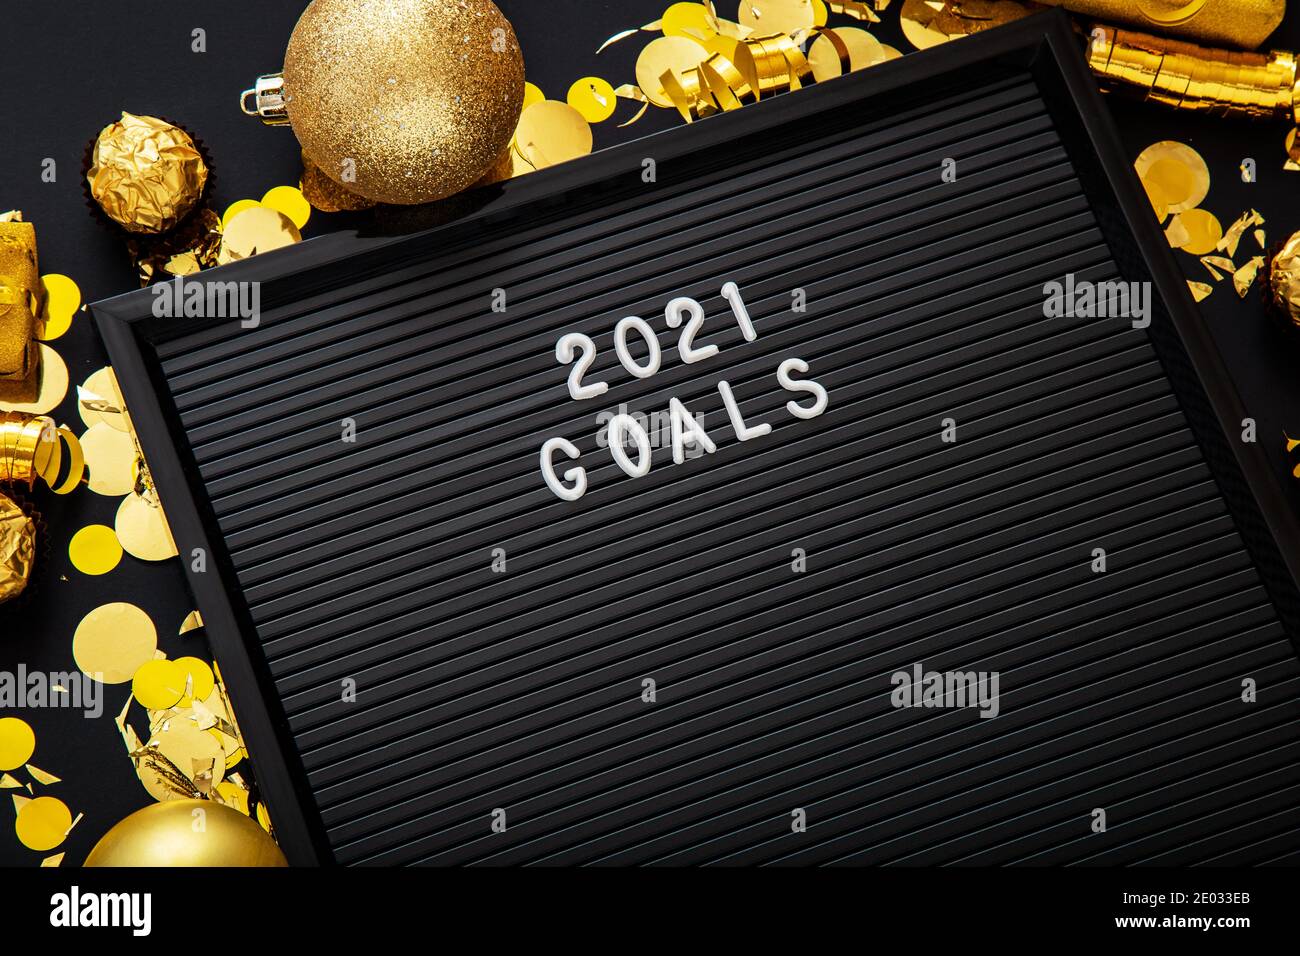 2021 Goals text on black Letter Board in Christmas festive decor, confetti ball. New year 2021 goals Stock Photo